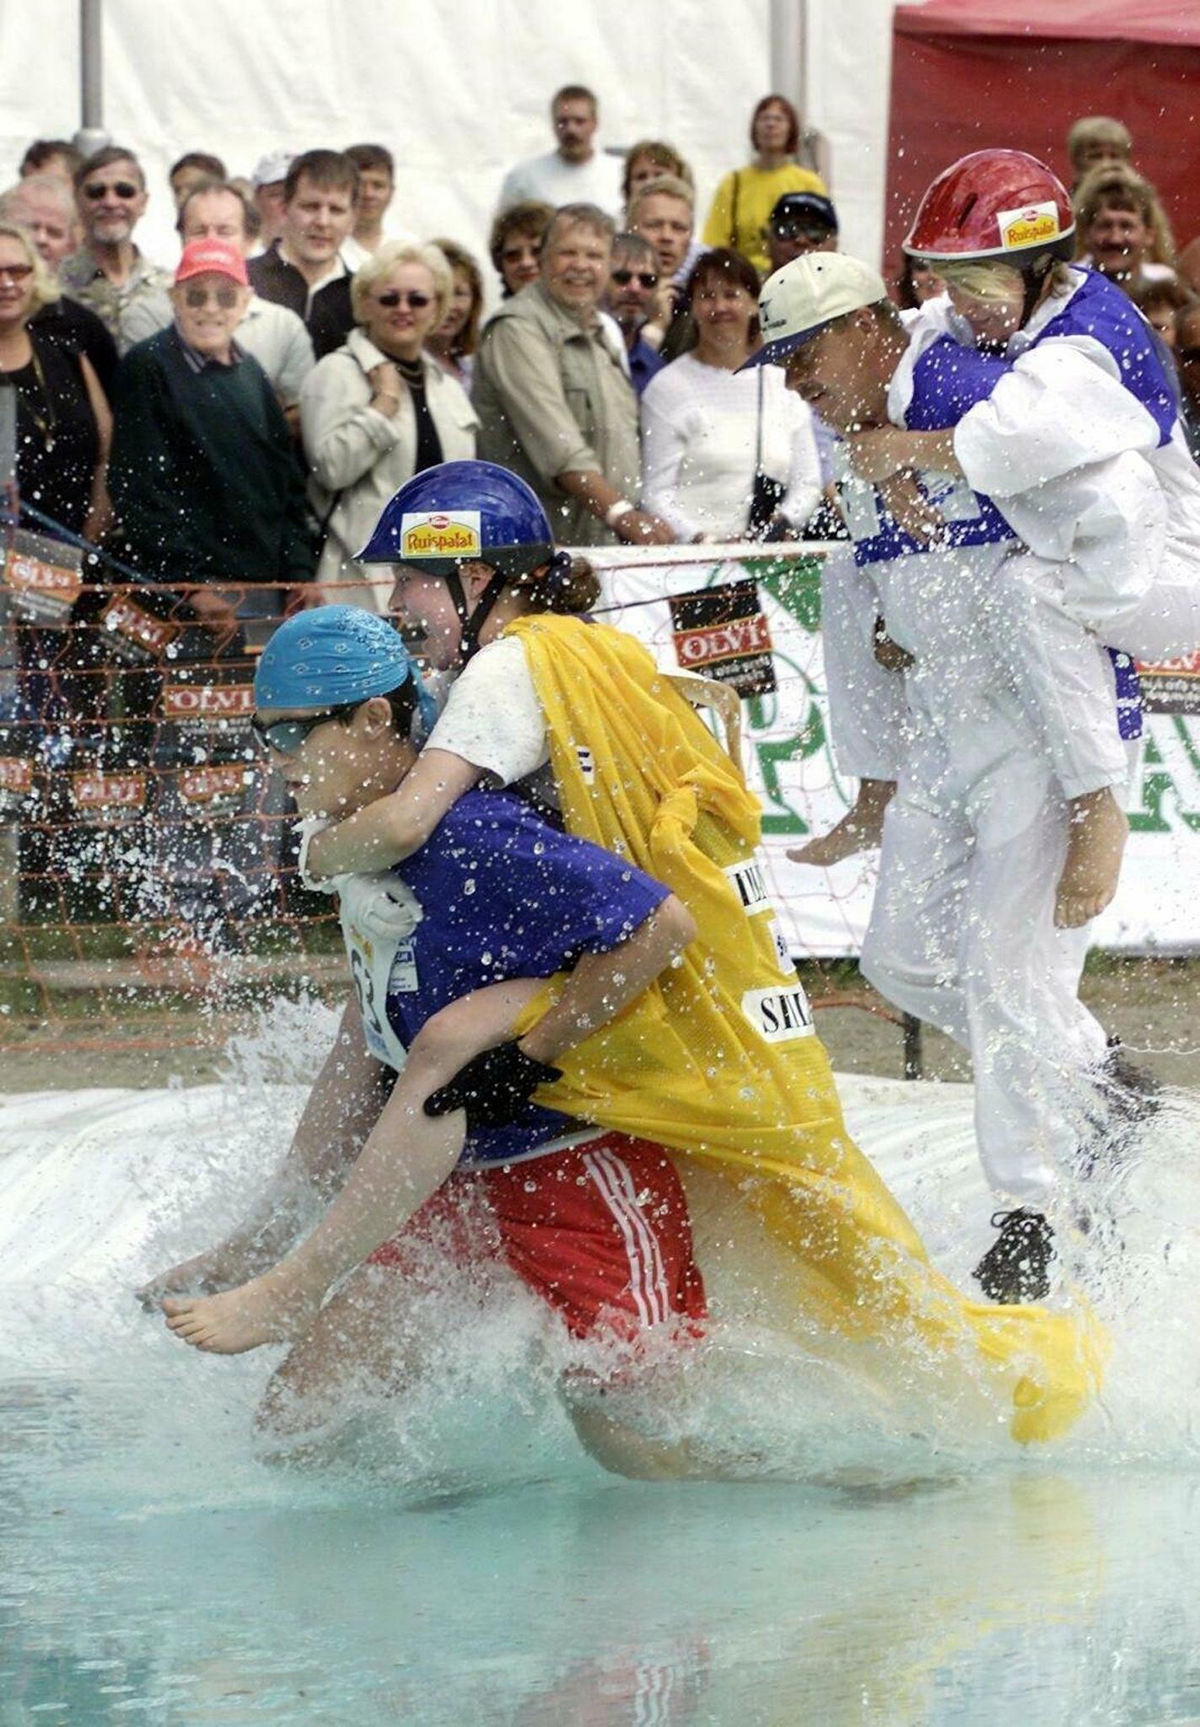 FINLAND'S WIFE CARRYING RACE